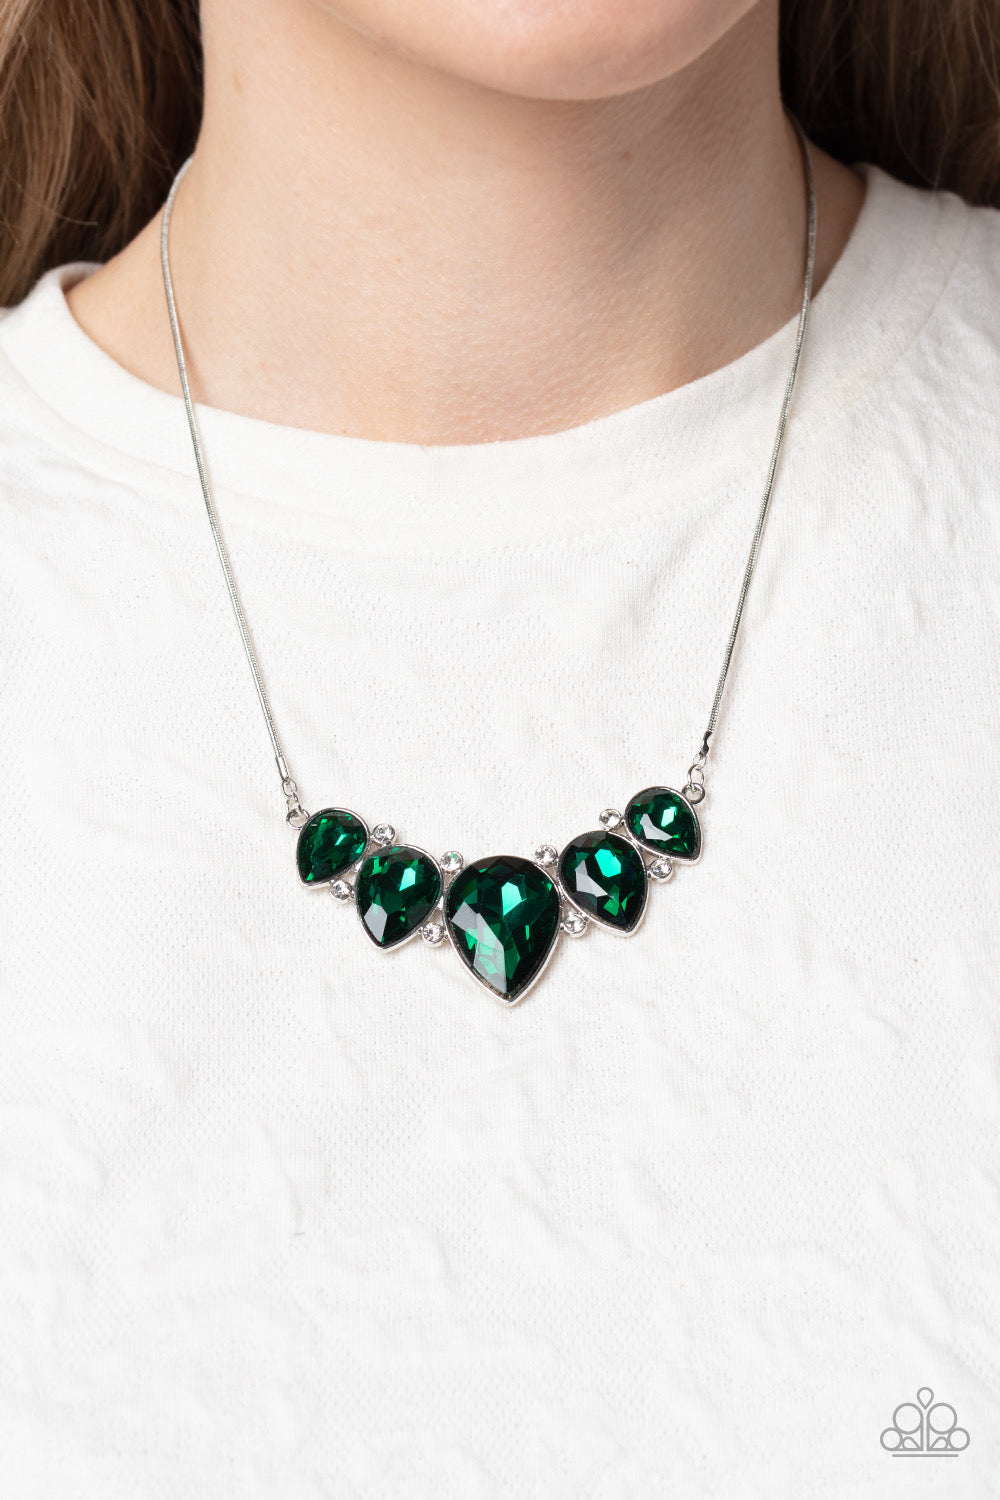 Paparazzi Regally Refined - Green Necklace -Paparazzi Jewelry Images